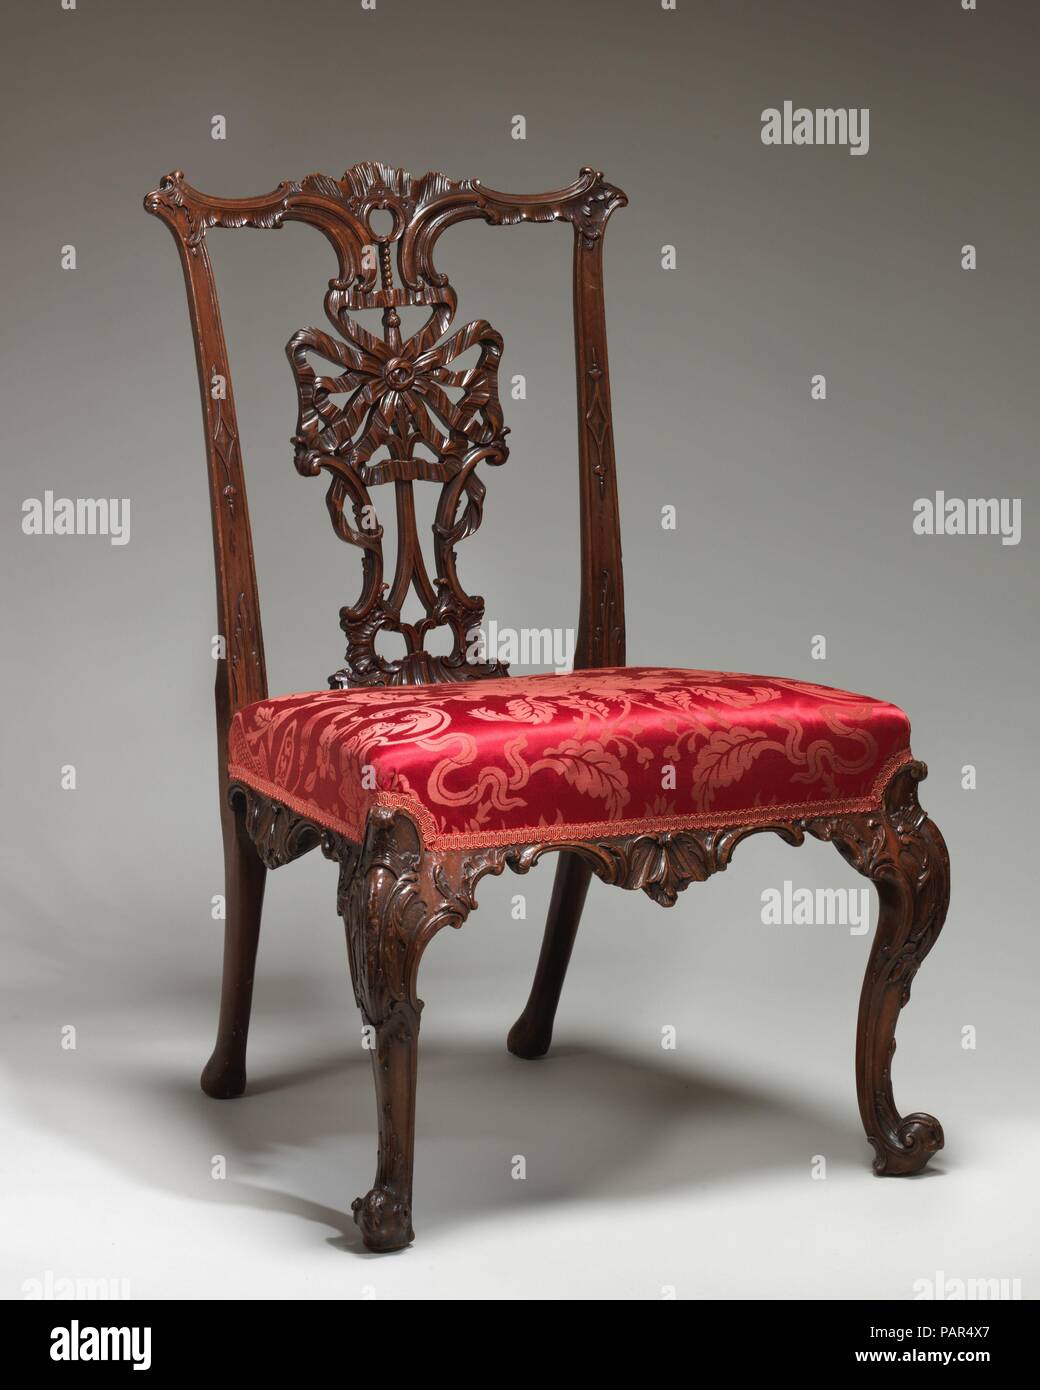 Side chair. Culture: British. Dimensions: Overall: 37 7/8 × 25 1/4 × 24 3/4 in. (96.2 × 64.1 × 62.9 cm). Date: mid-18th century.  The design is based on one of several 'ribband-back chairs' in the first edition of Thomas Chippendale's influential book, The Gentleman and Cabinet-Maker's Director of 1754. The preparatory drawing for this plate, which also appeared in the editions of 1755 and 1762, is in the Drawings Department at The Metropolitan Museum of Art. Museum: Metropolitan Museum of Art, New York, USA. Stock Photo